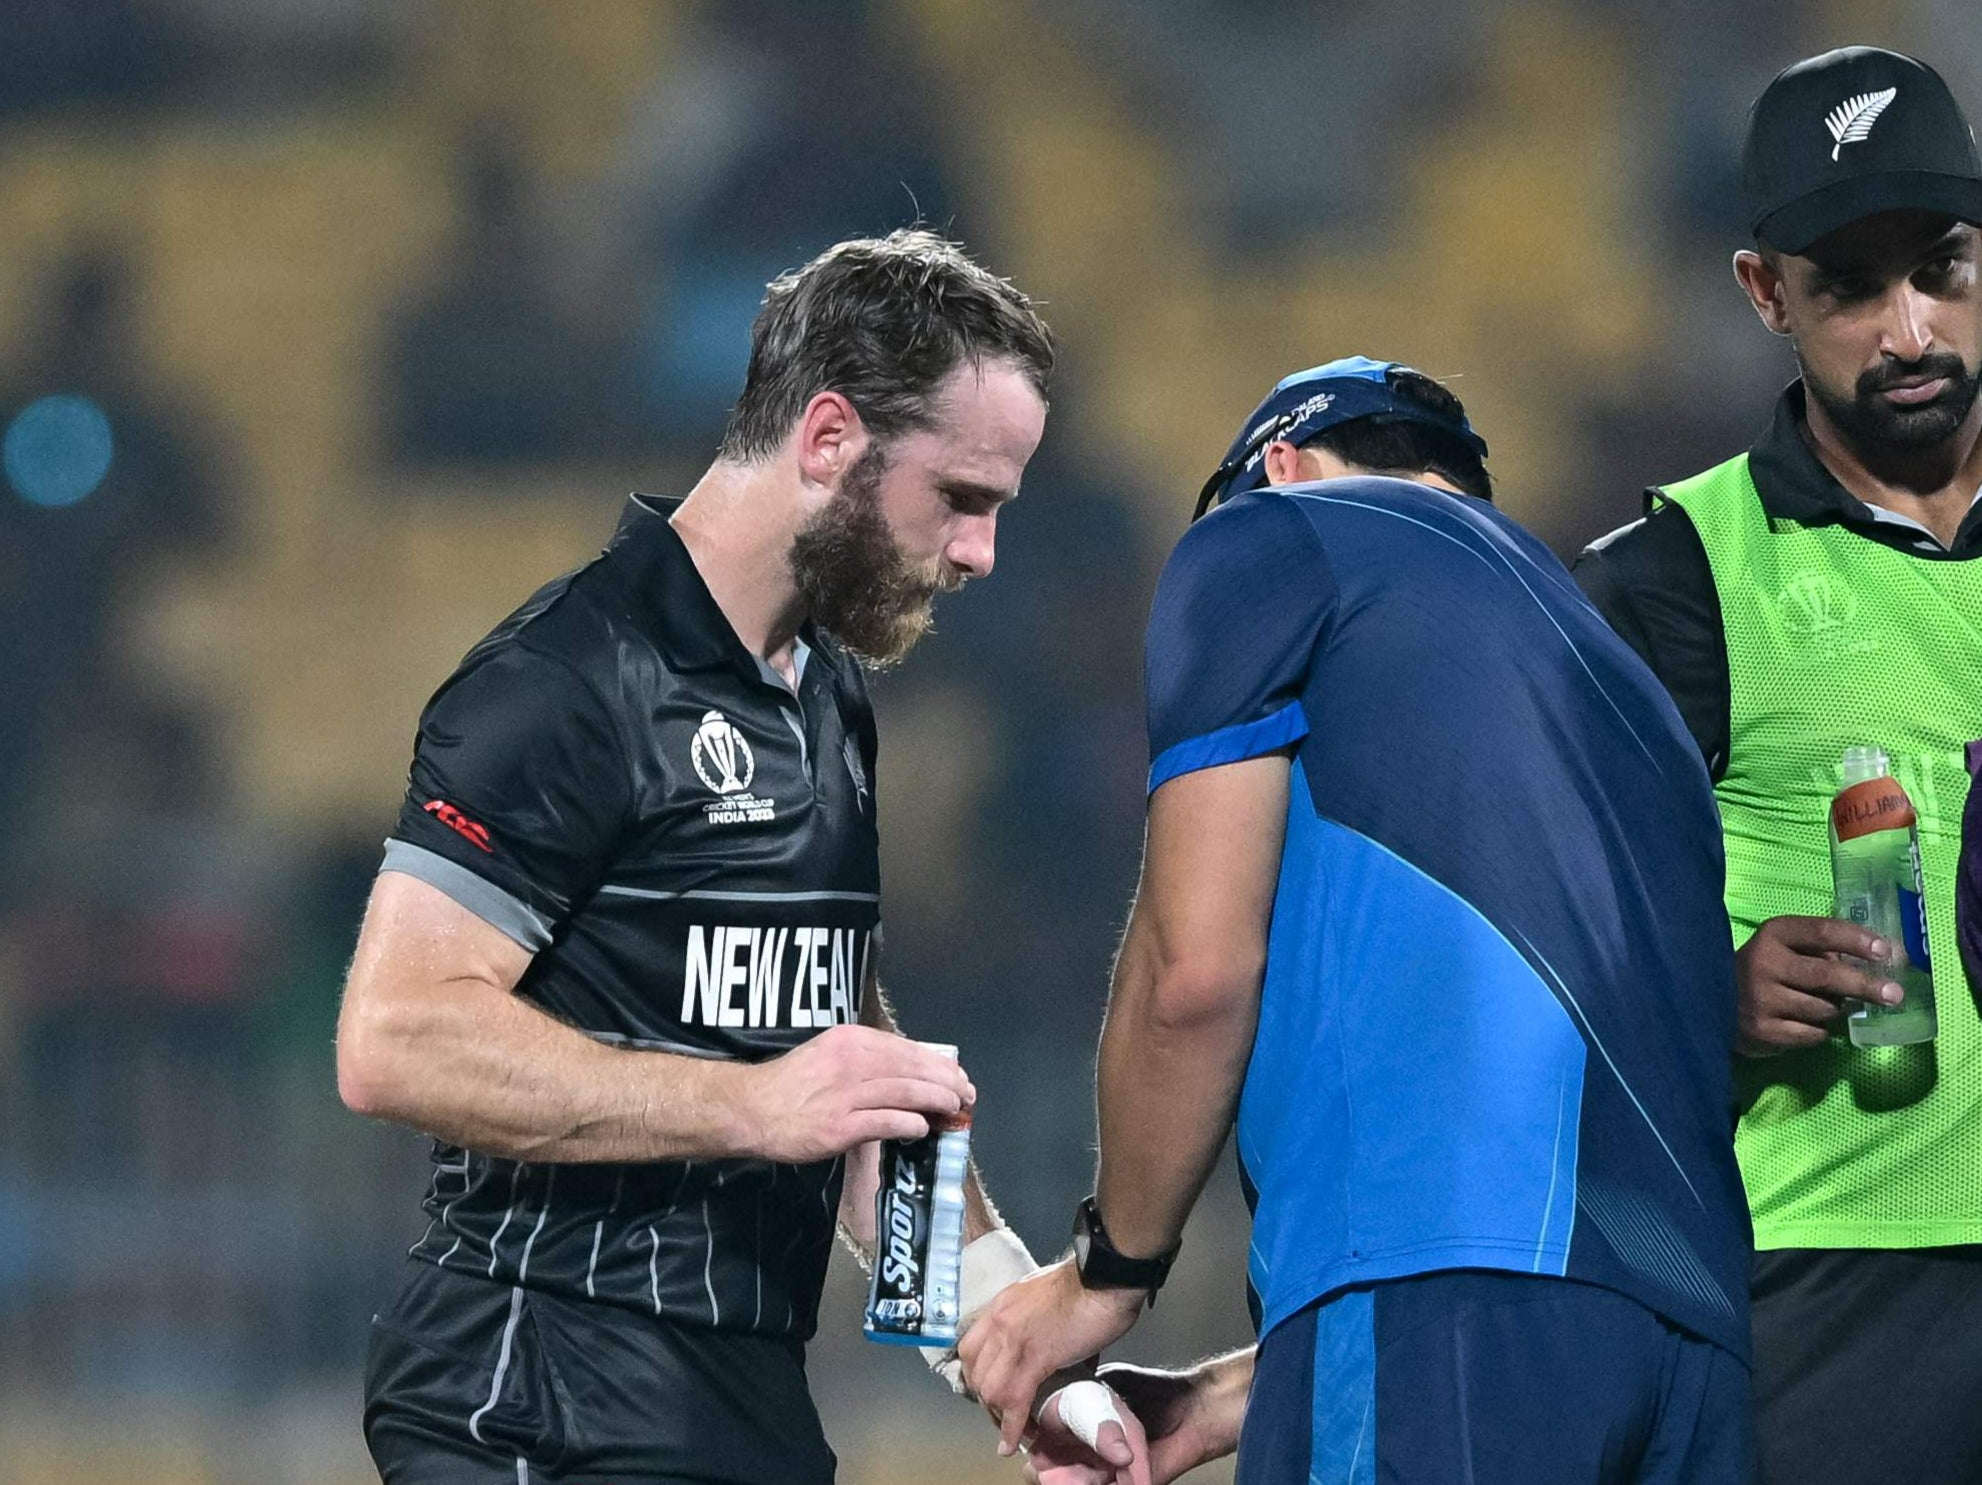 New Zealand’s captain Kane Williamson is being helped by a medic